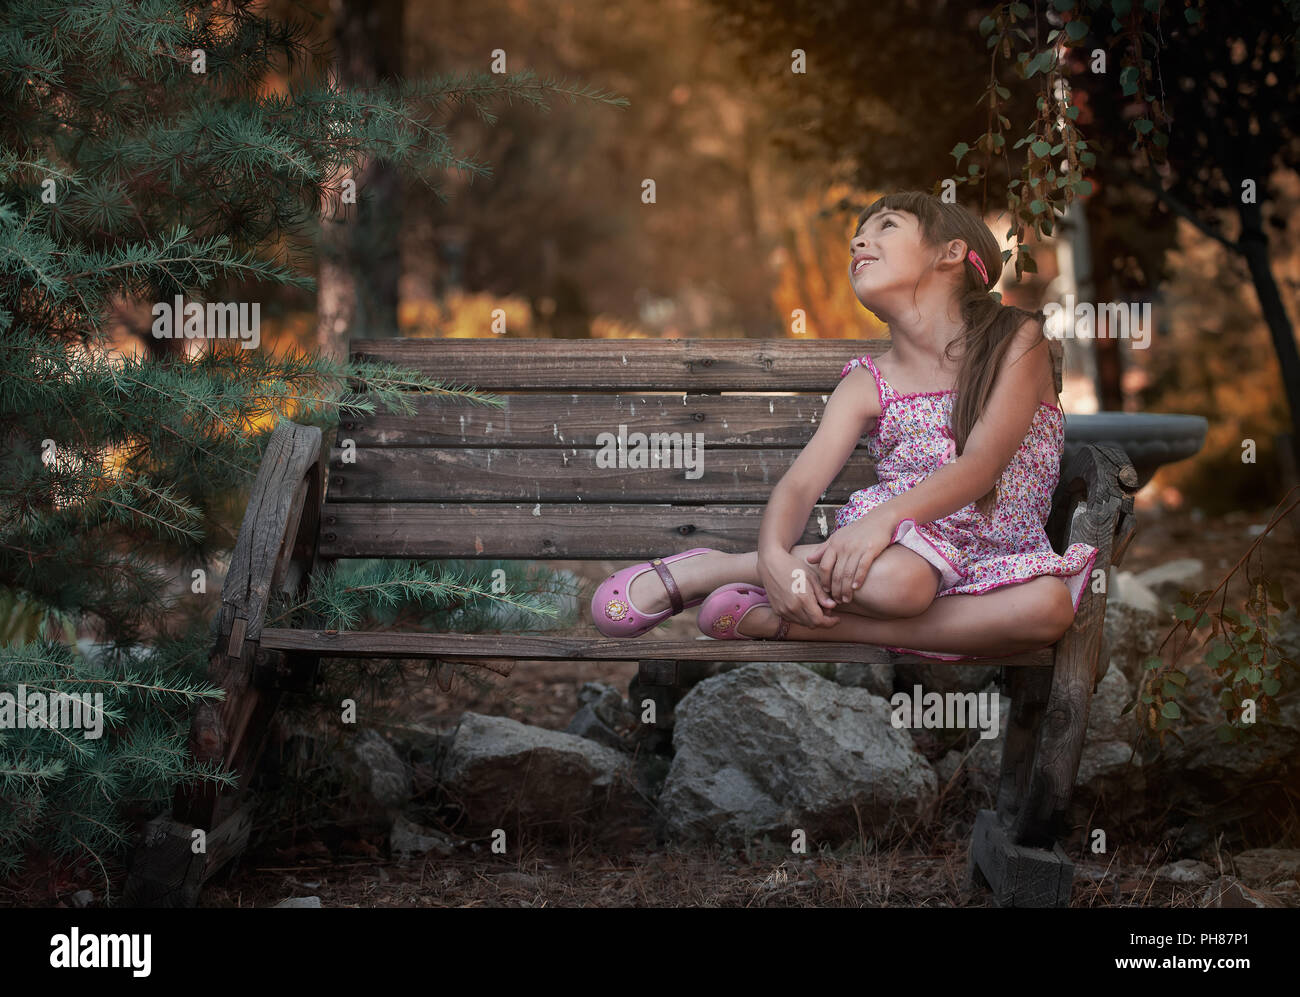 Little girl sitting on a bench Stock Photo